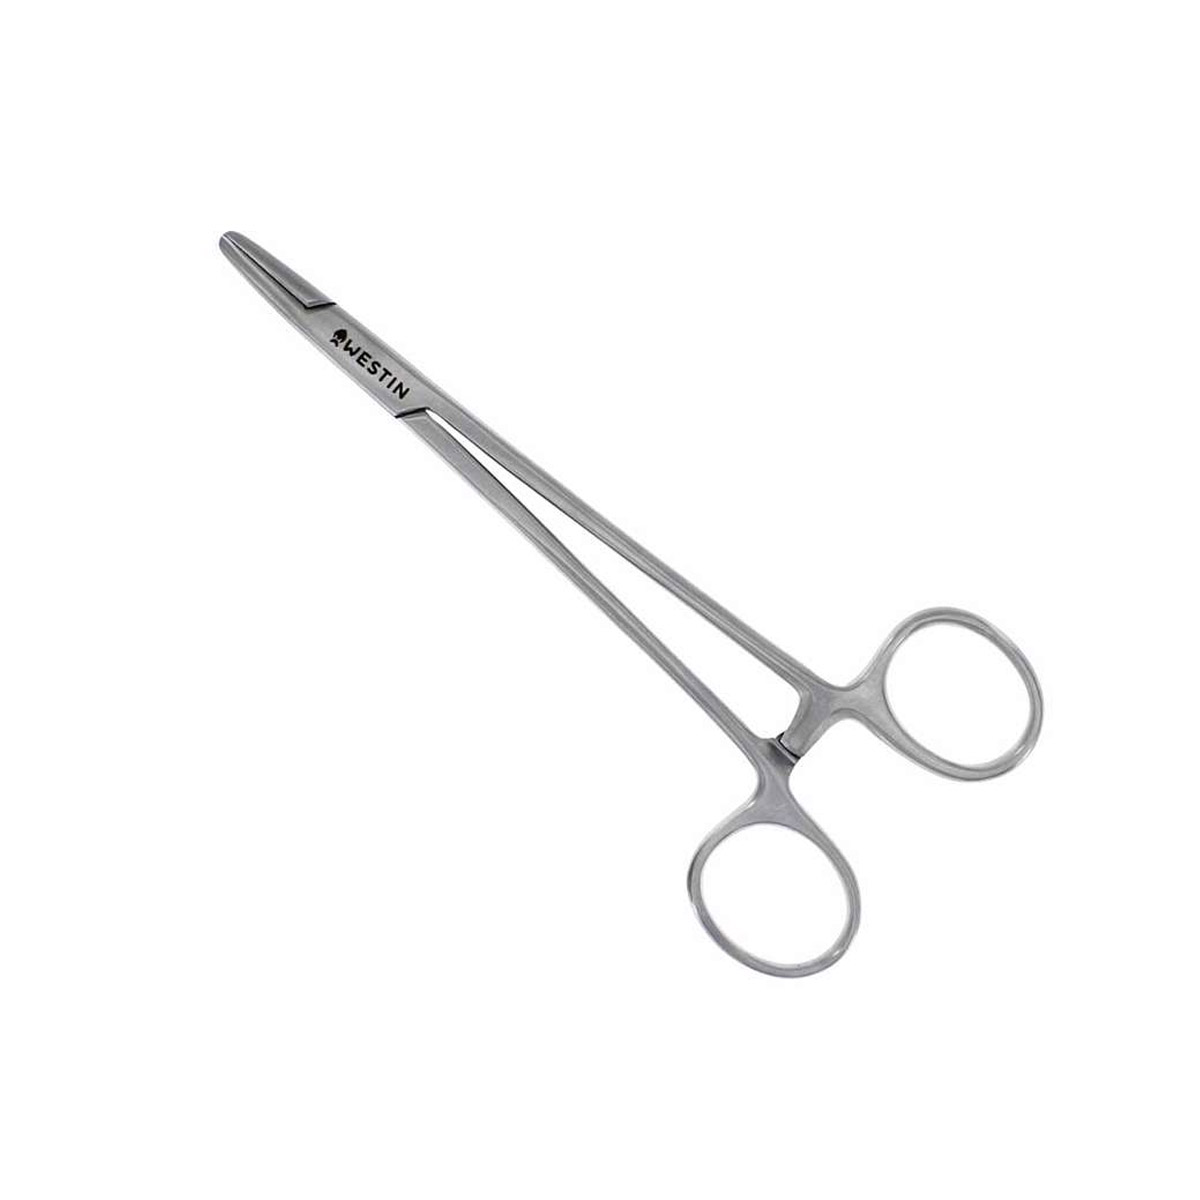 Westin Forceps Stainless Steel Large 16 CM